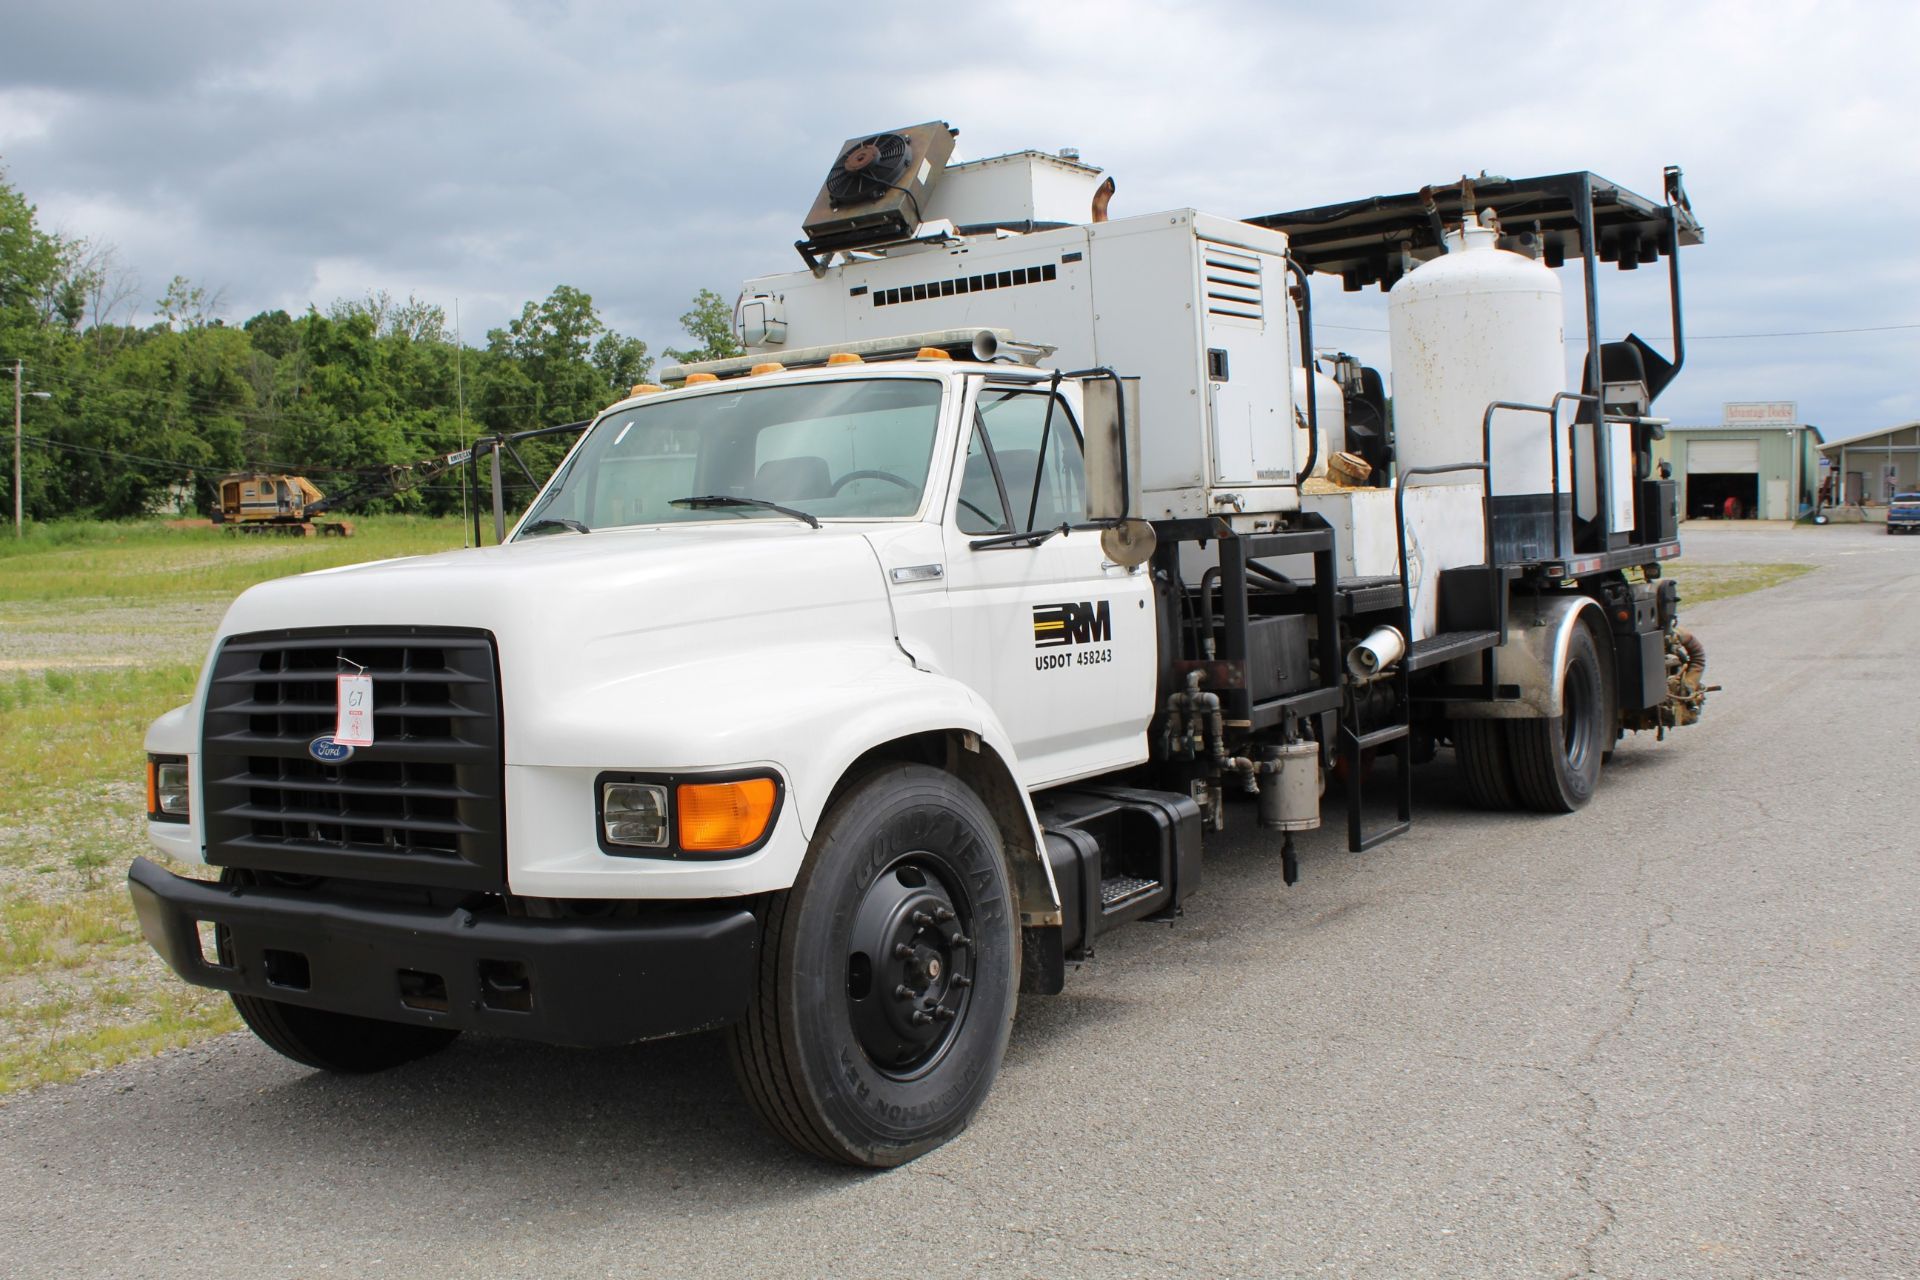 2004 MRL 4000 PT Paint Striper, s/n 04404 mounted on 1995 Ford F800 VIN 1FDWF80C1SVA44334 14 DAY